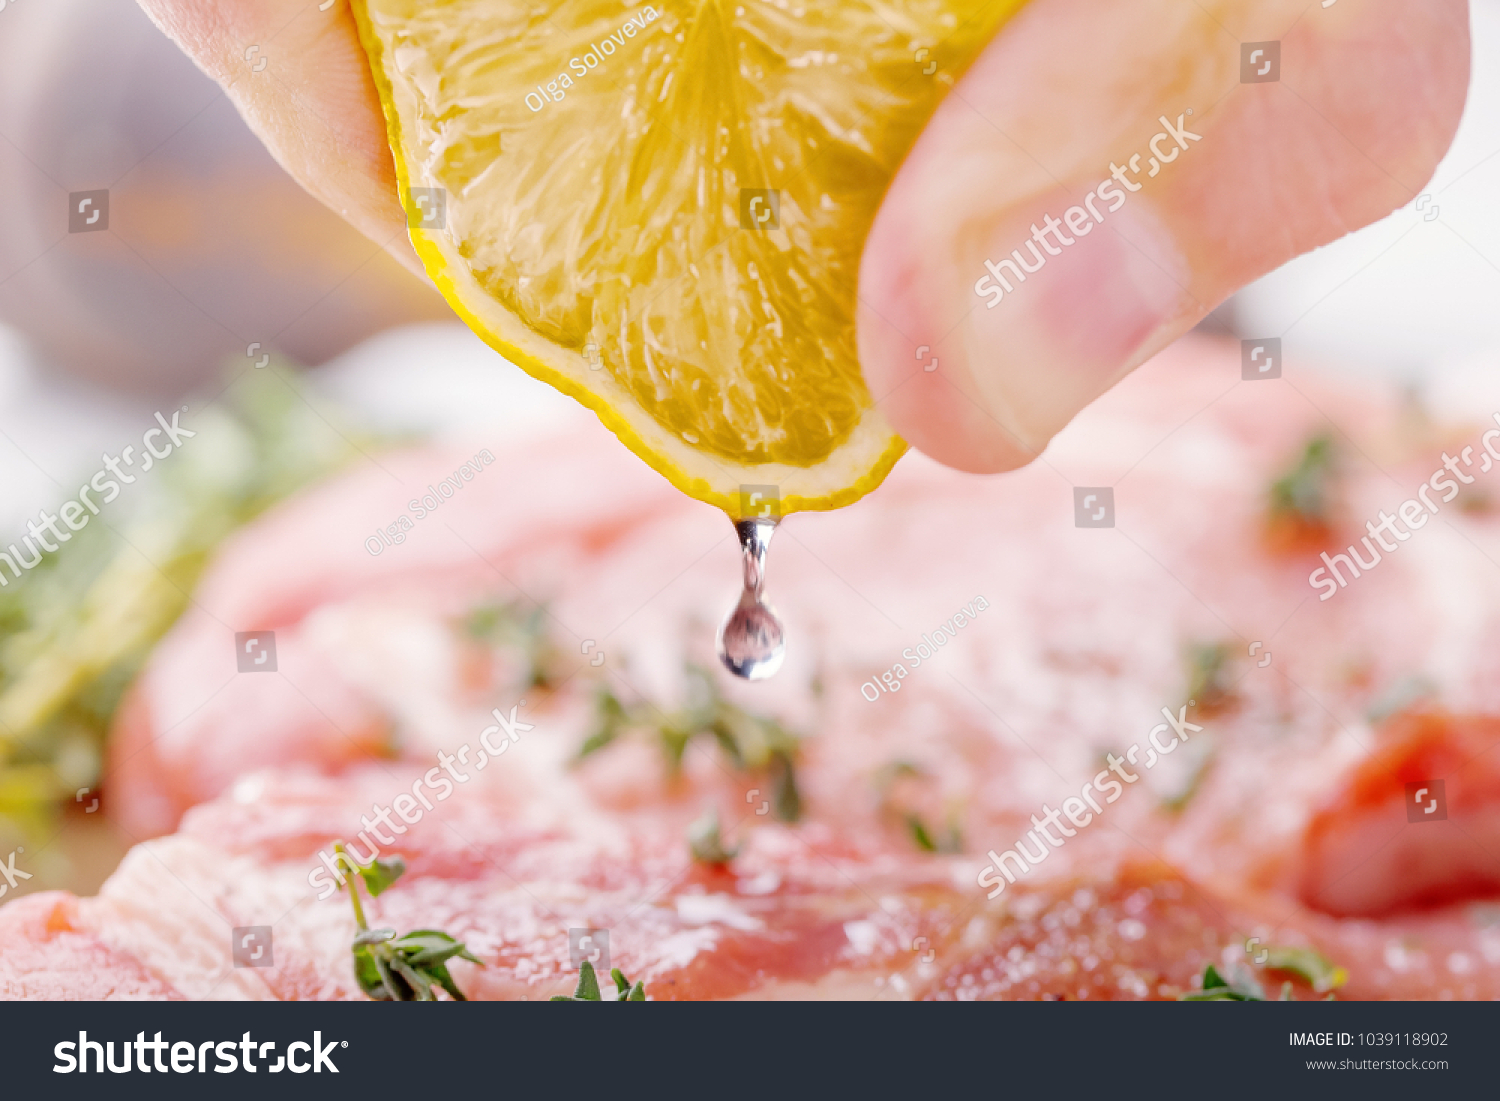 The man's hand squeezes the lemon juice with a raw pork steak. Also on the table, onion, thyme, garlic, salt, pepper, salt and pepper shaker on a wooden cutting board close-up #1039118902